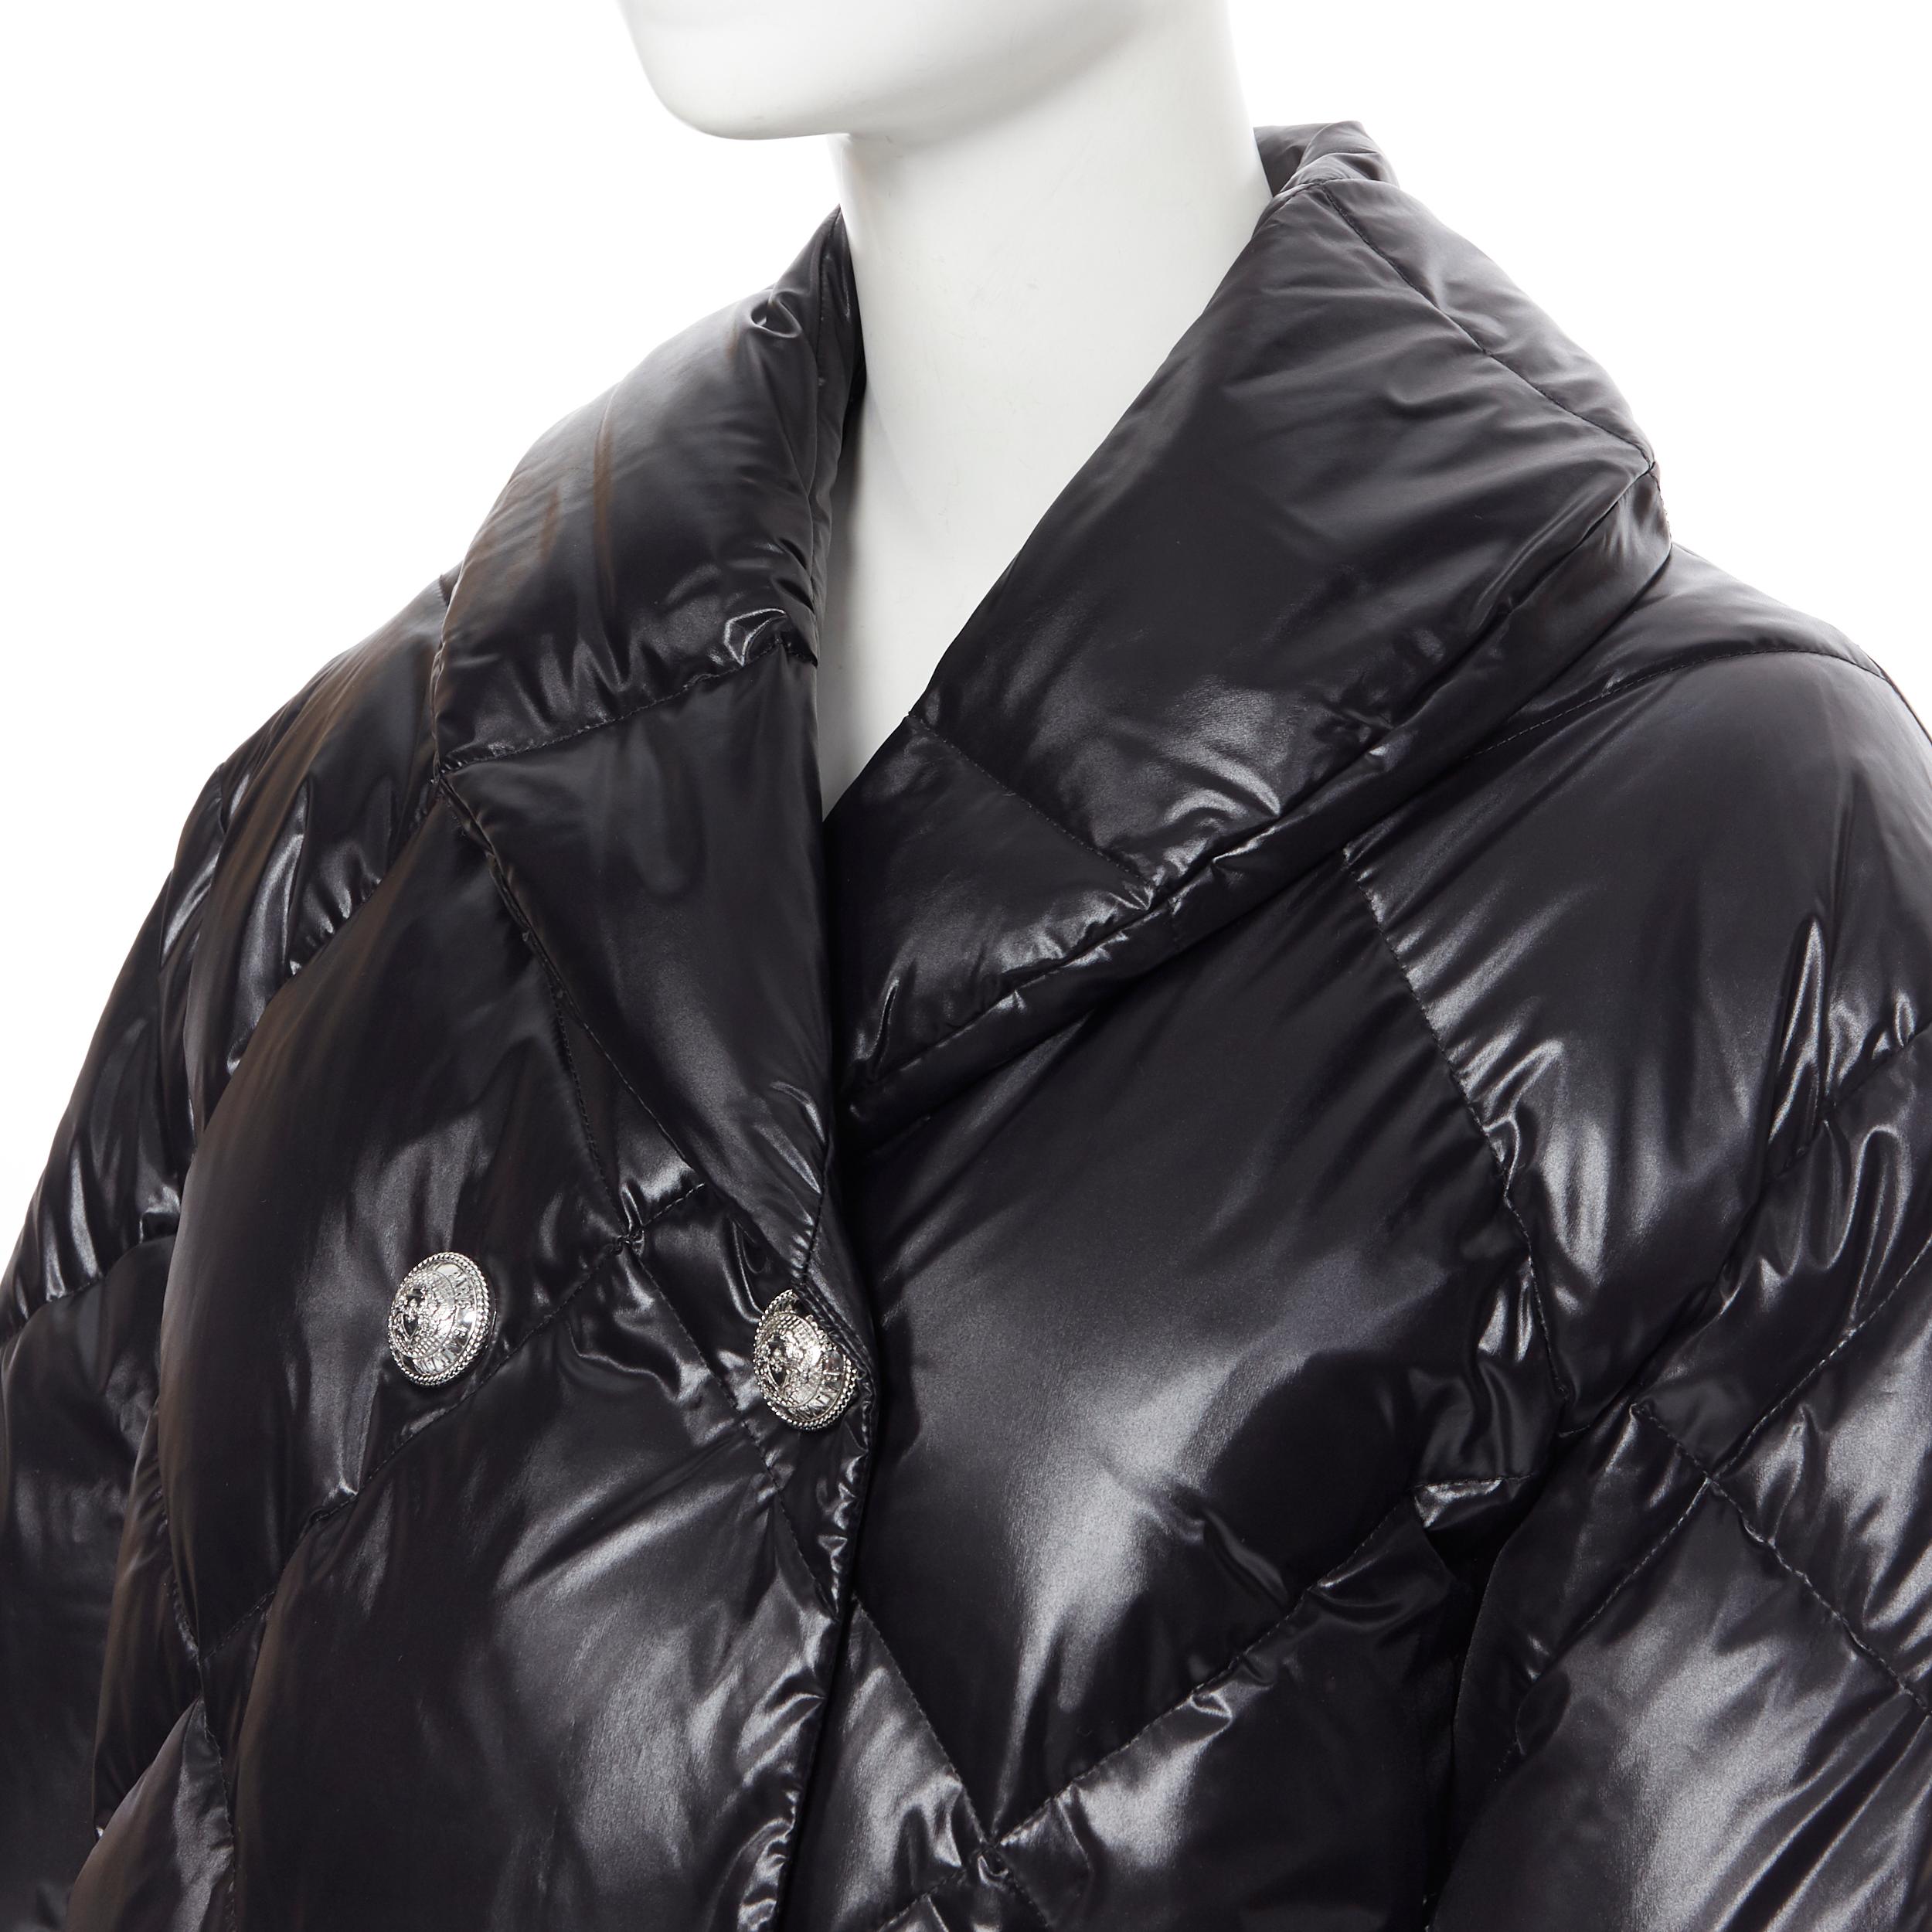 new BALMAIN black double breasted diamond goose down quilted puffer jacket FR34
Brand: Balmain
Designer: Olivier Rousteing
Model Name / Style: Puffer jacket
Material: Viscose; down filled
Color: Black
Pattern: Solid
Closure: Button
Extra Detail: